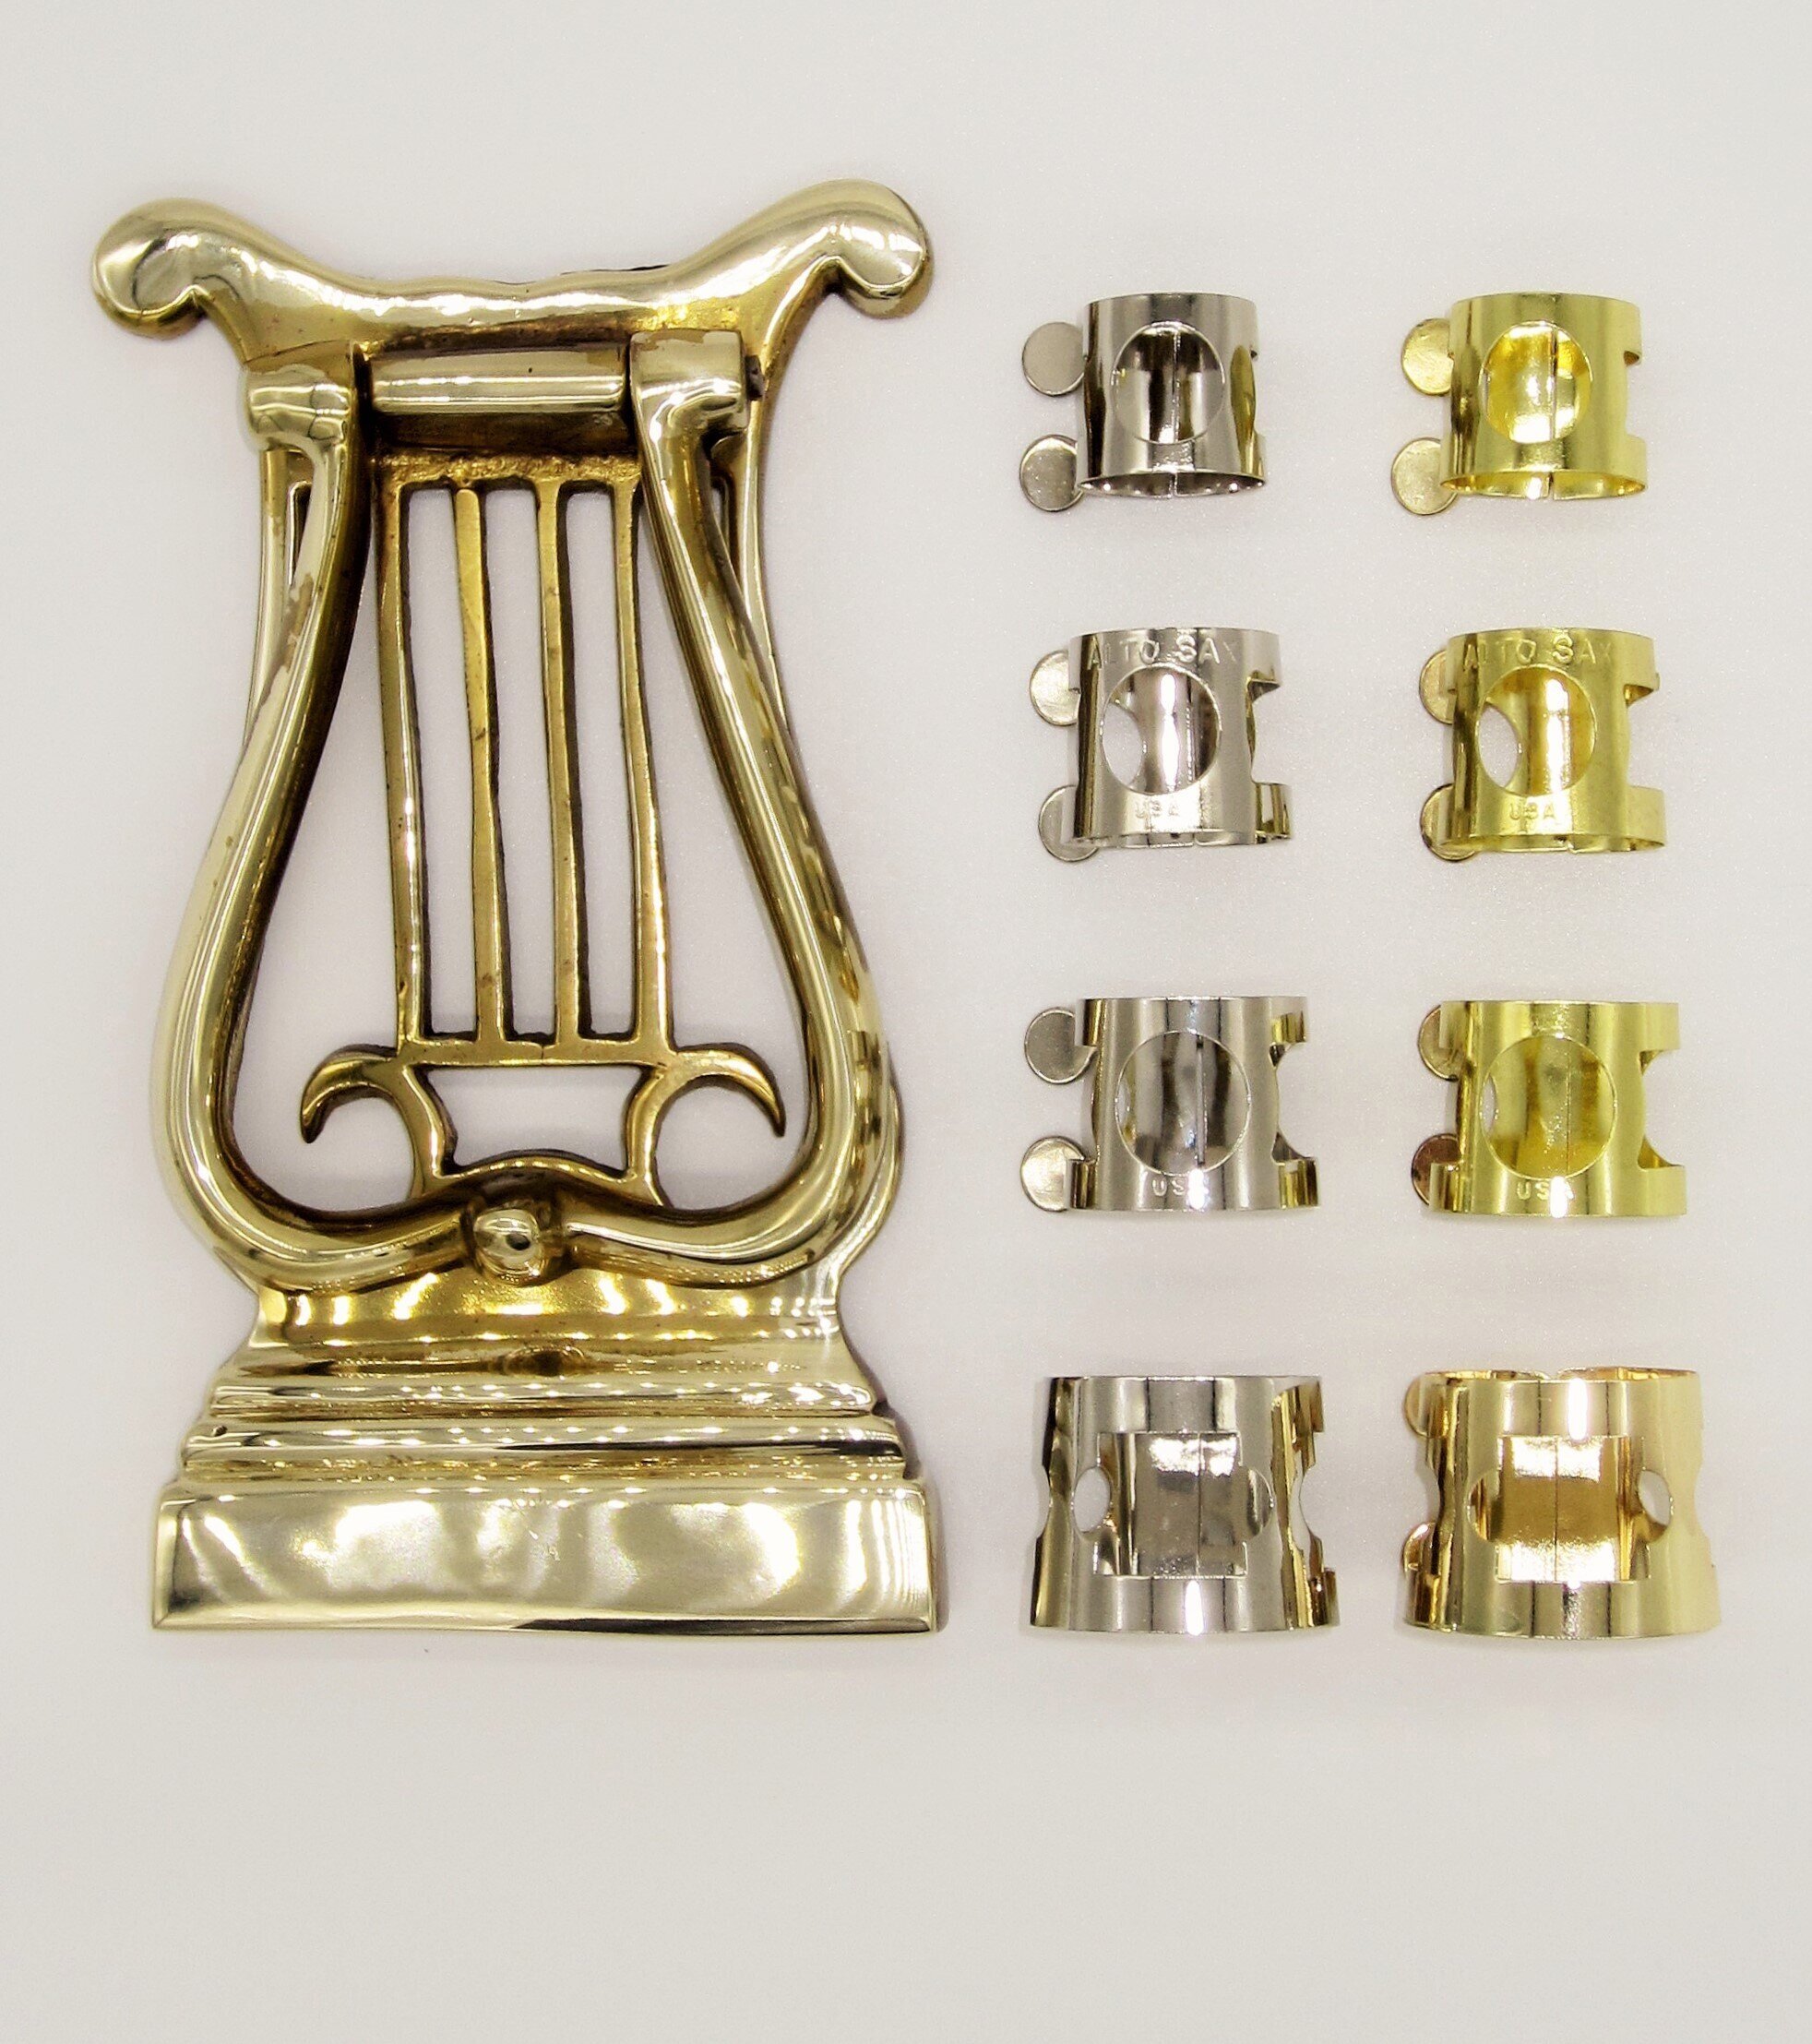 Saxophone Ligatures (from top): Soprano (#331 N or G); Alto (#334 N or G); Bari Full (#337 N or G)